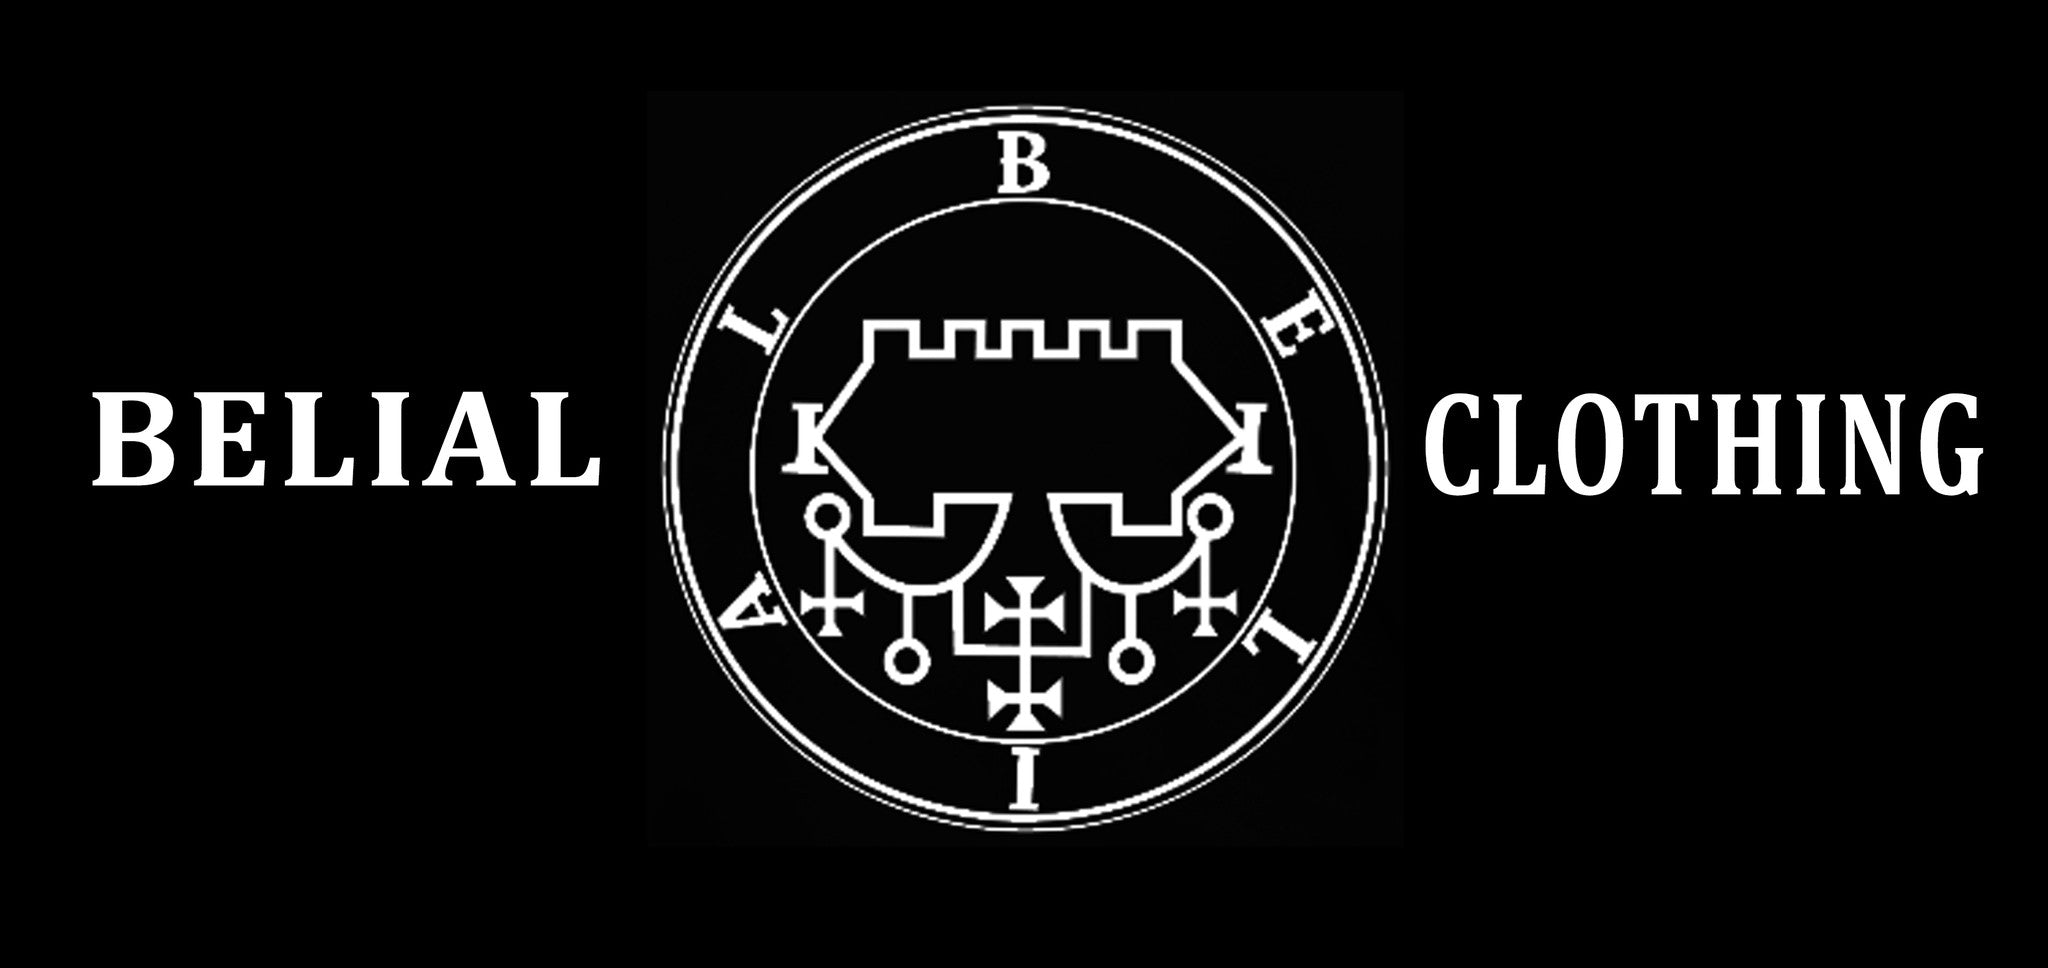 Gift Card Occult Satanic Belial Clothing 